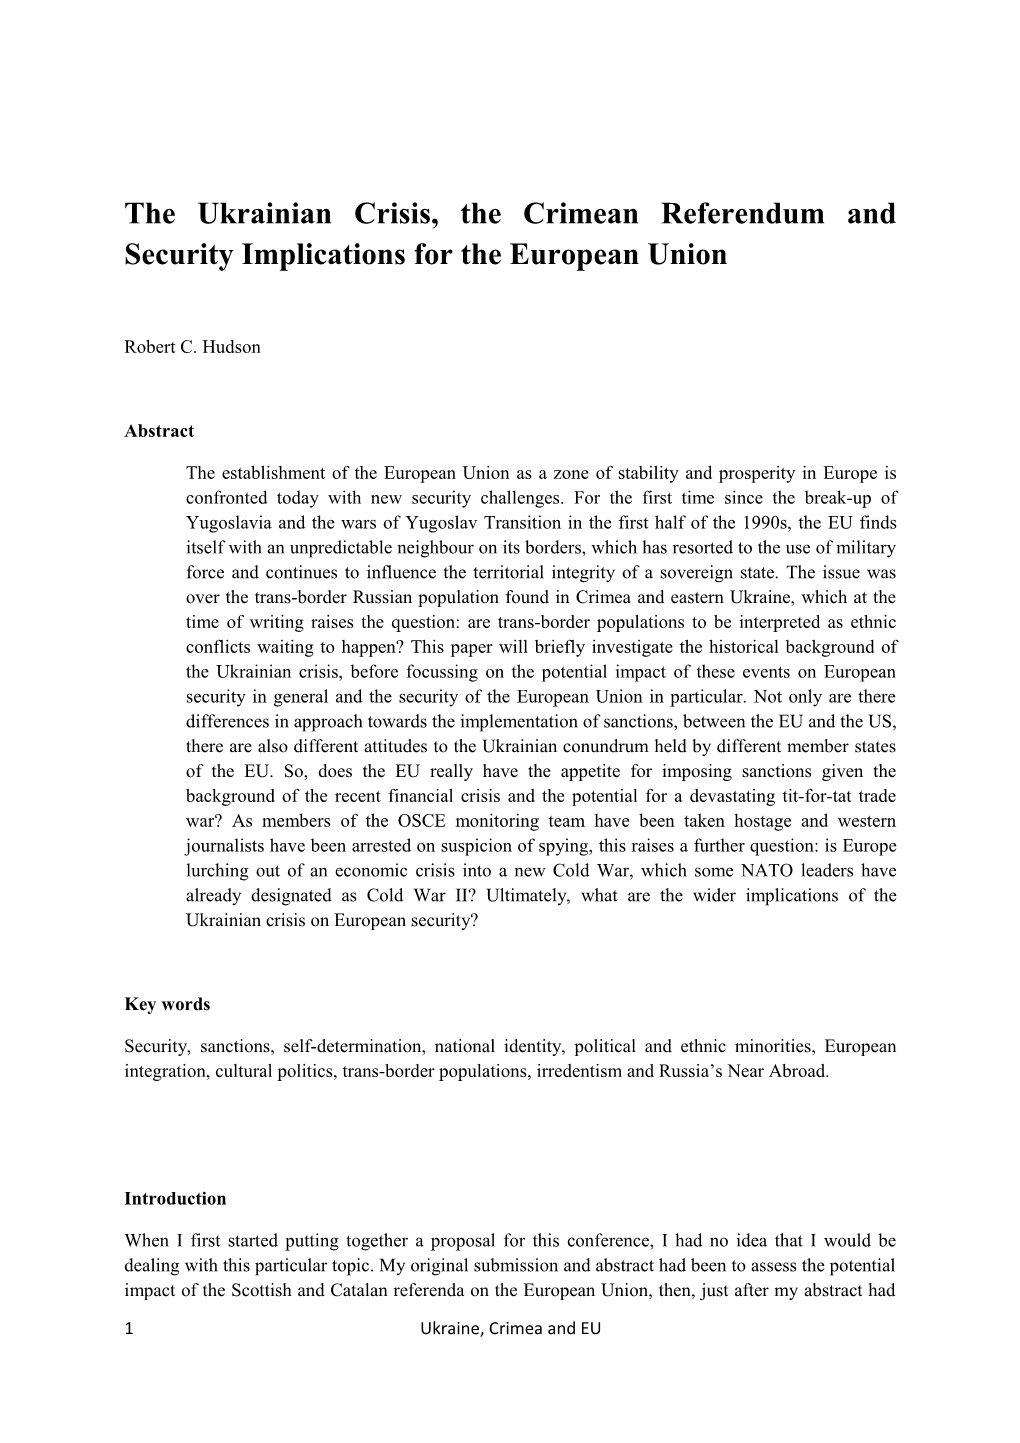 The Ukrainian Crisis, the Crimean Referendum and Security Implications for the European Union